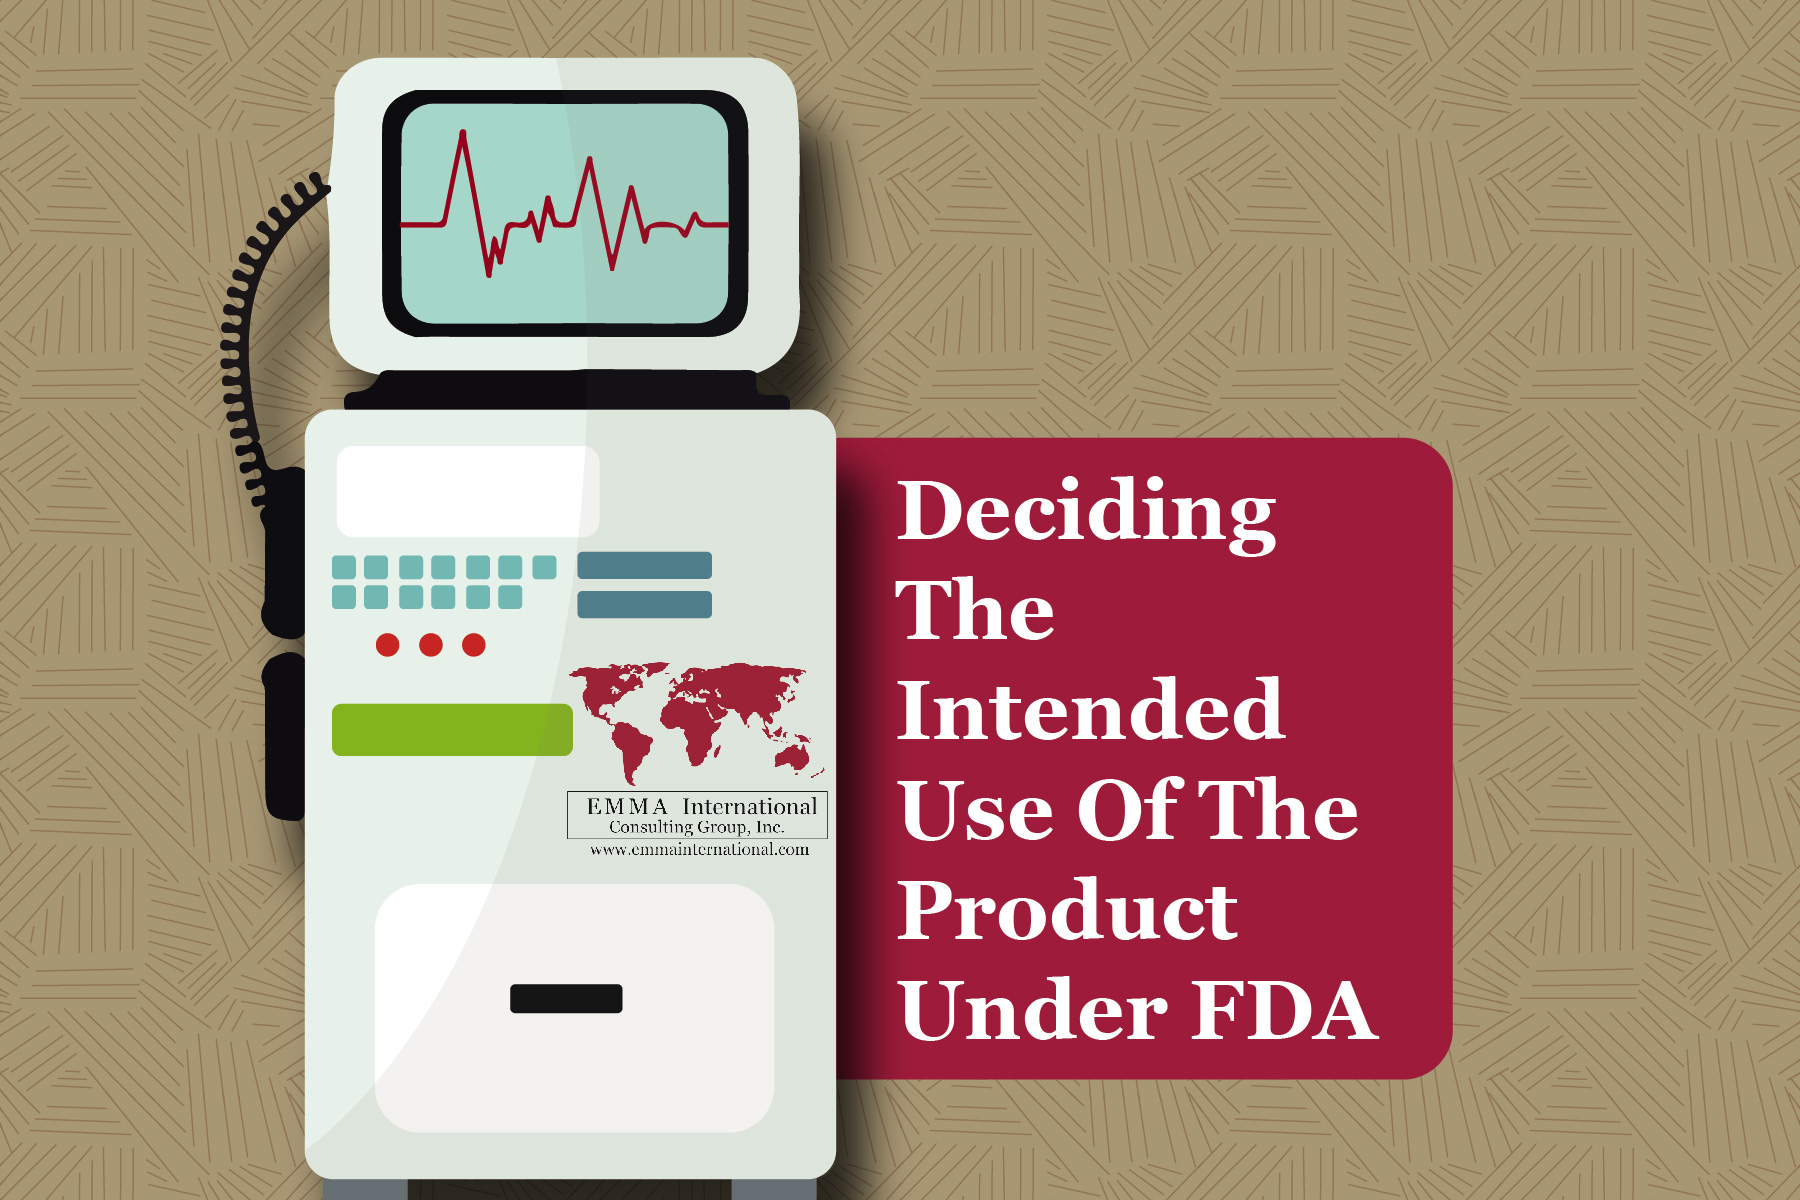 Deciding The Intended Use Of The Product Under FDA